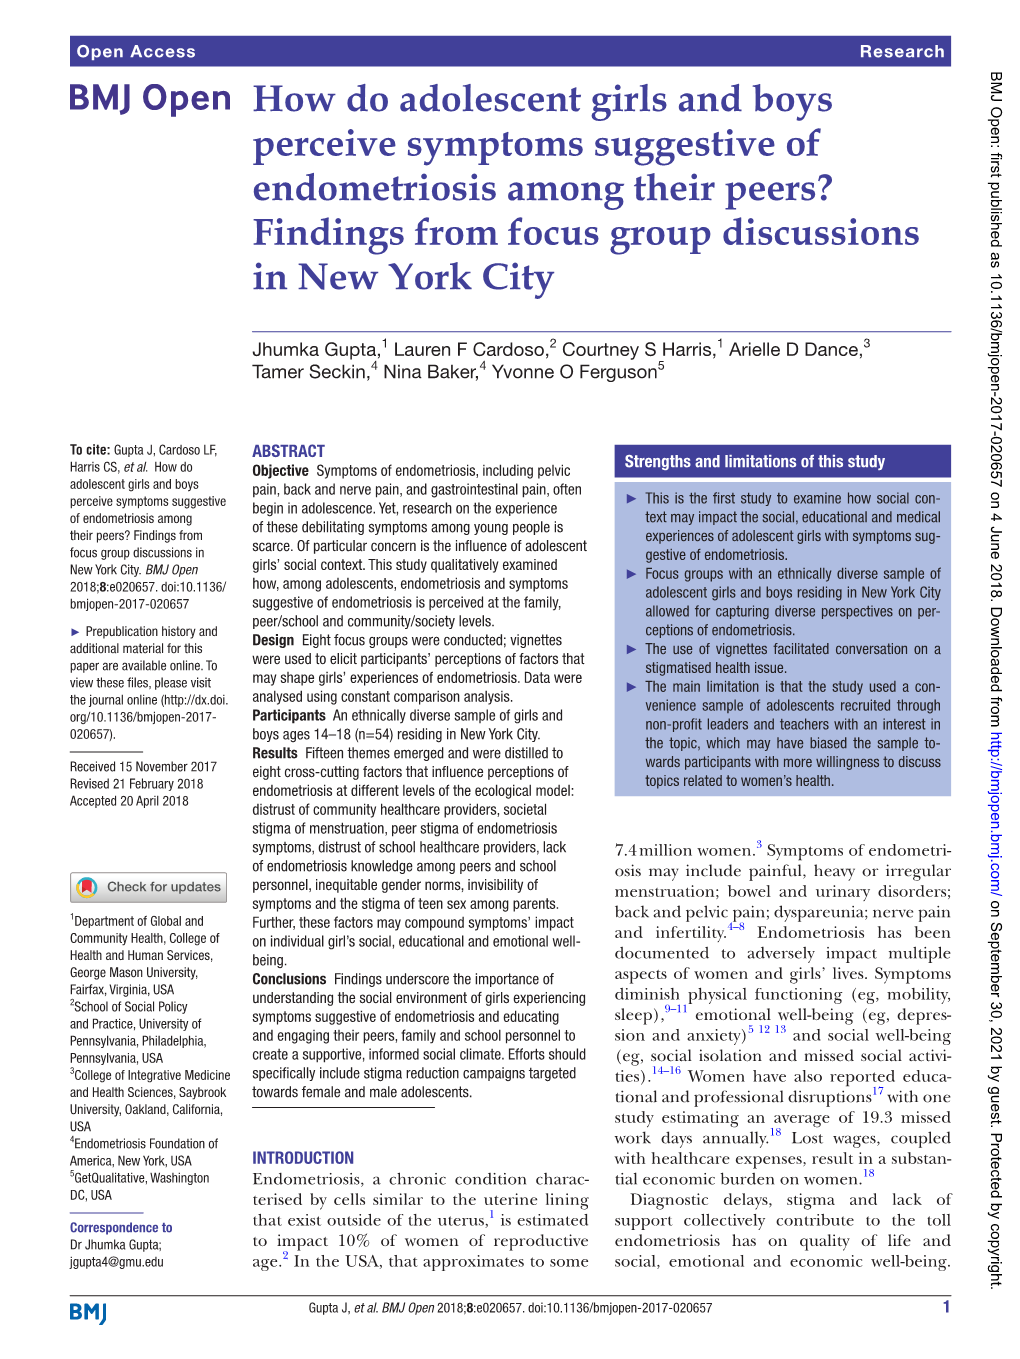 How Do Adolescent Girls and Boys Perceive Symptoms Suggestive of Endometriosis Among Their Peers? Findings from Focus Group Discussions in New York City